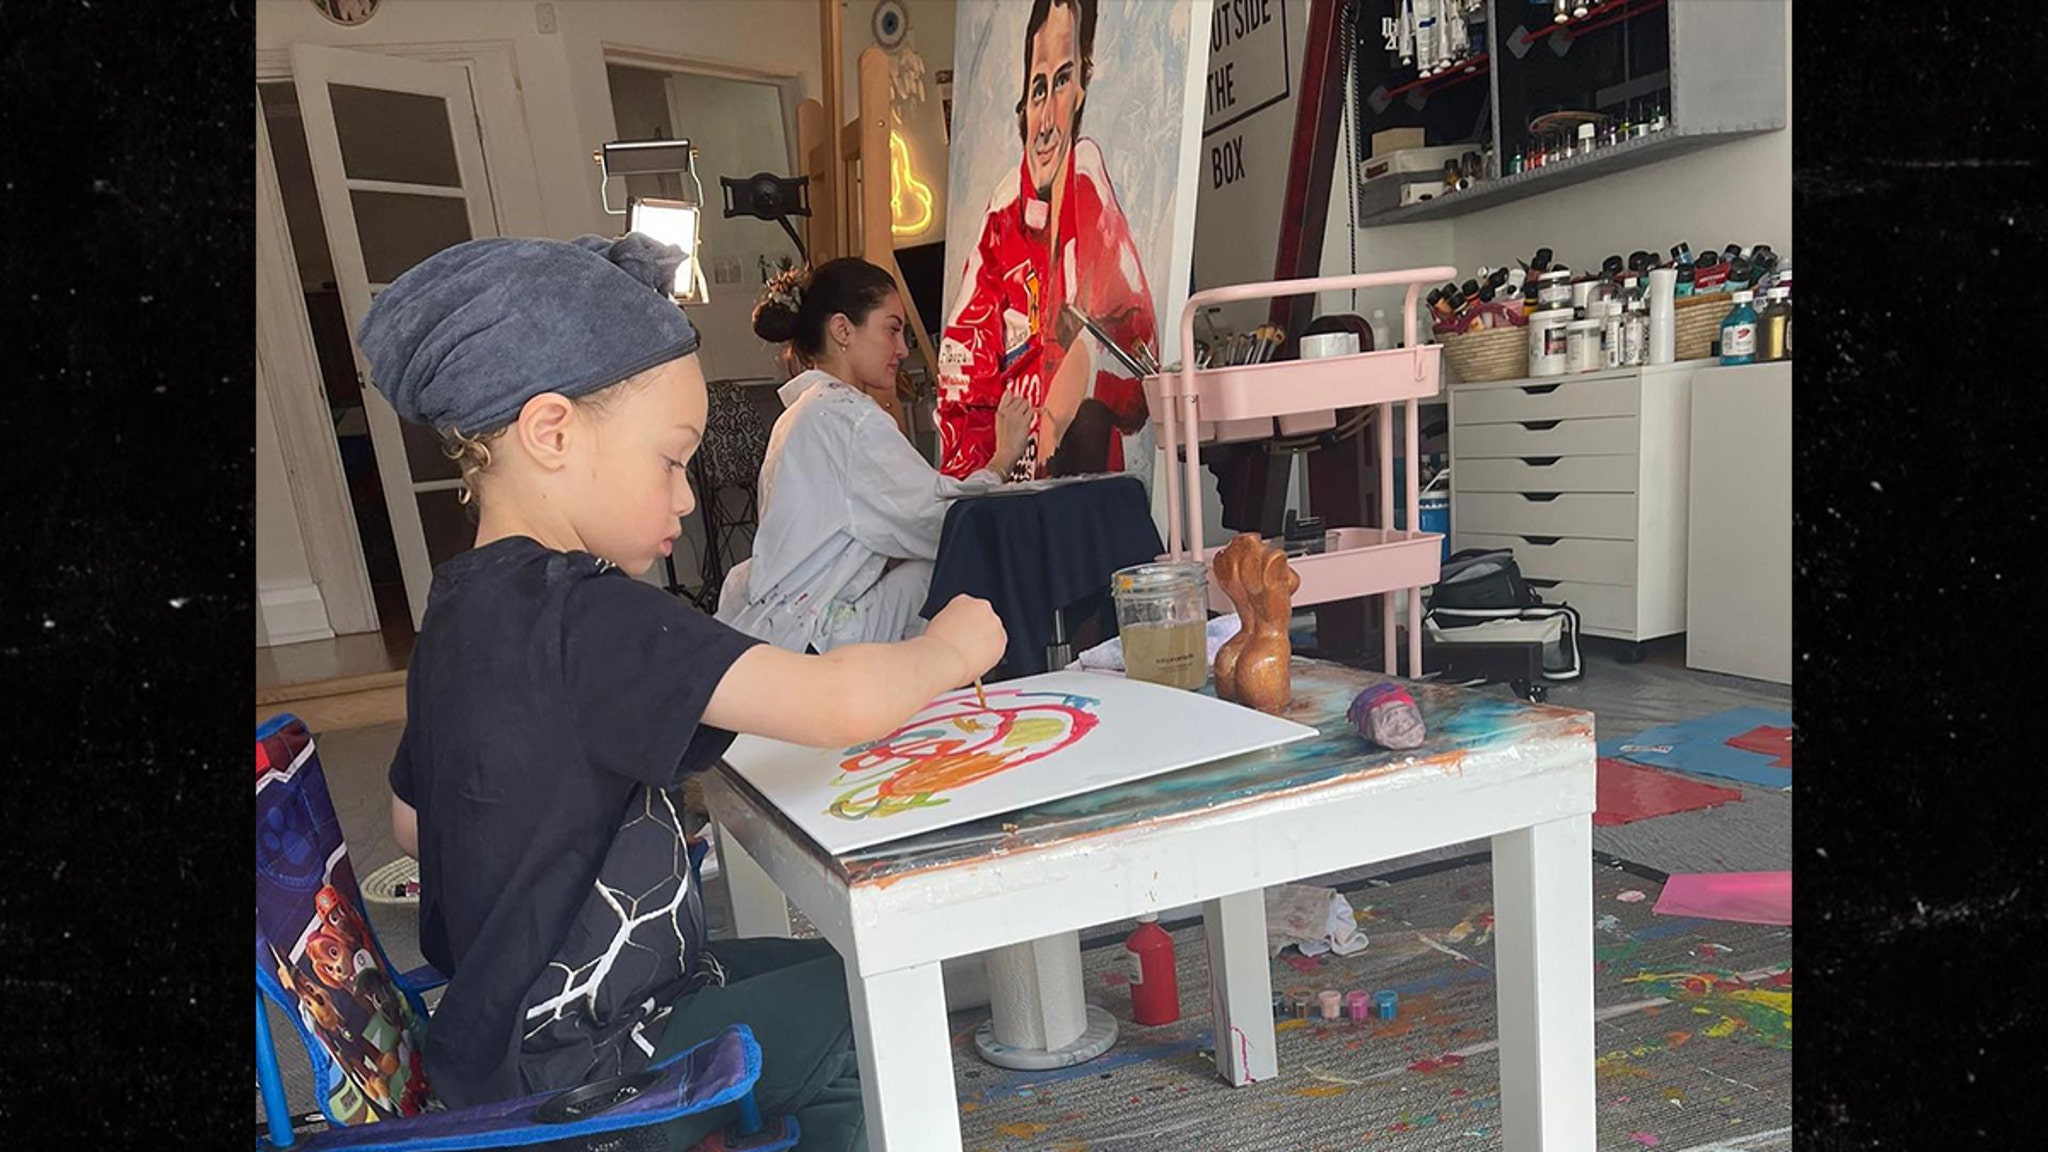 Drake’s Son Adonis Shows Off Artistic Skills Painting with Mom